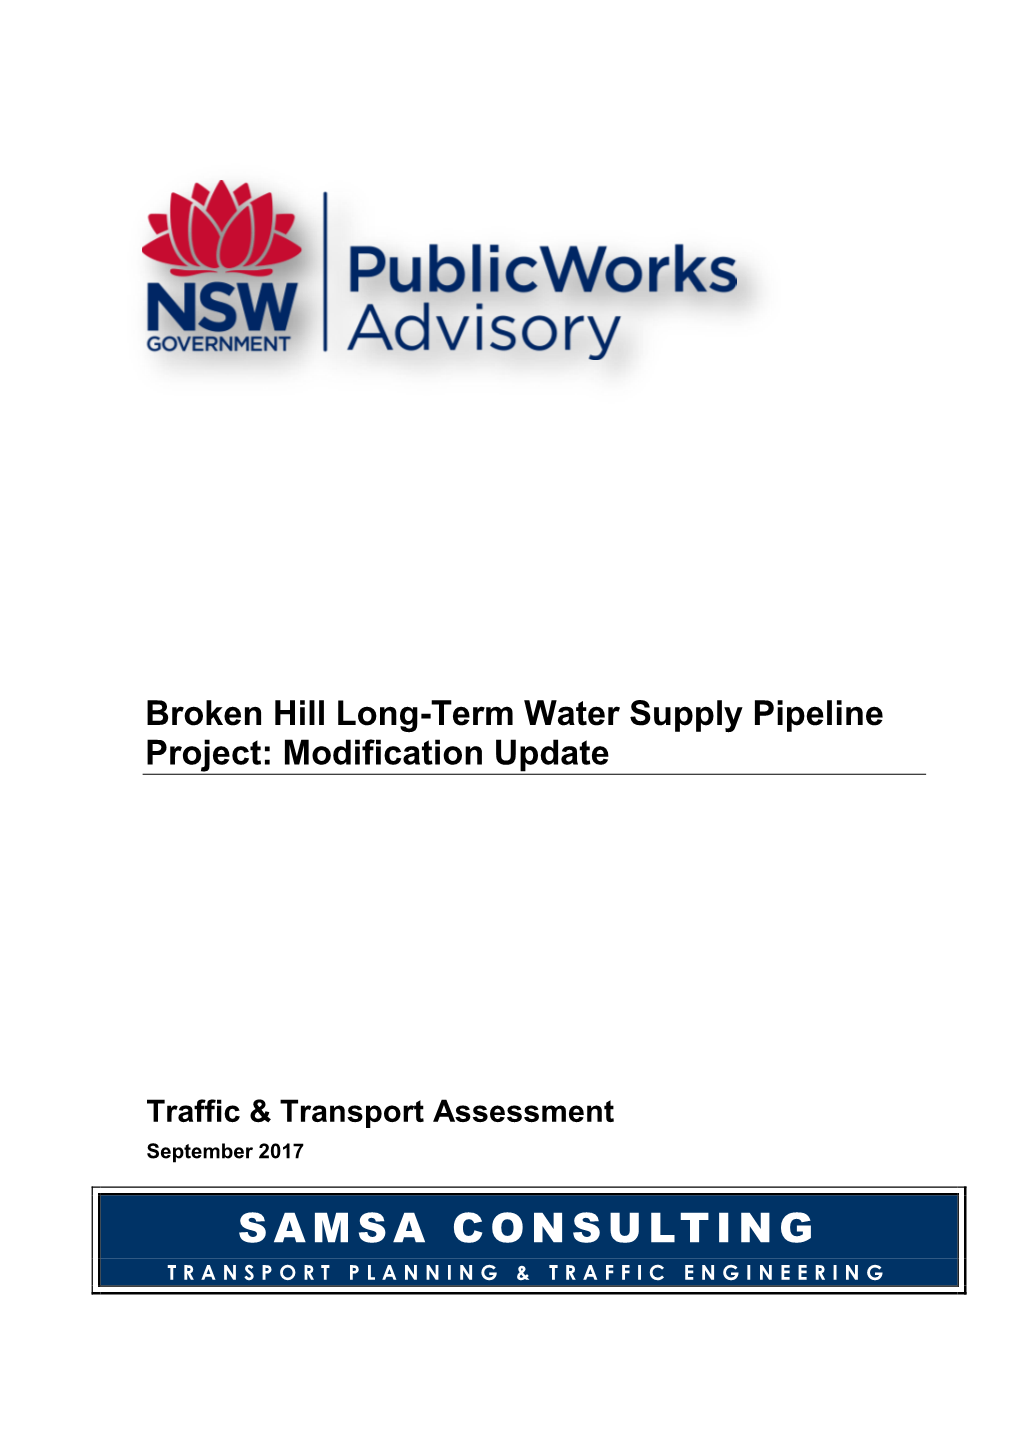 Broken Hill Long-Term Water Supply Pipeline Project: Modification Update